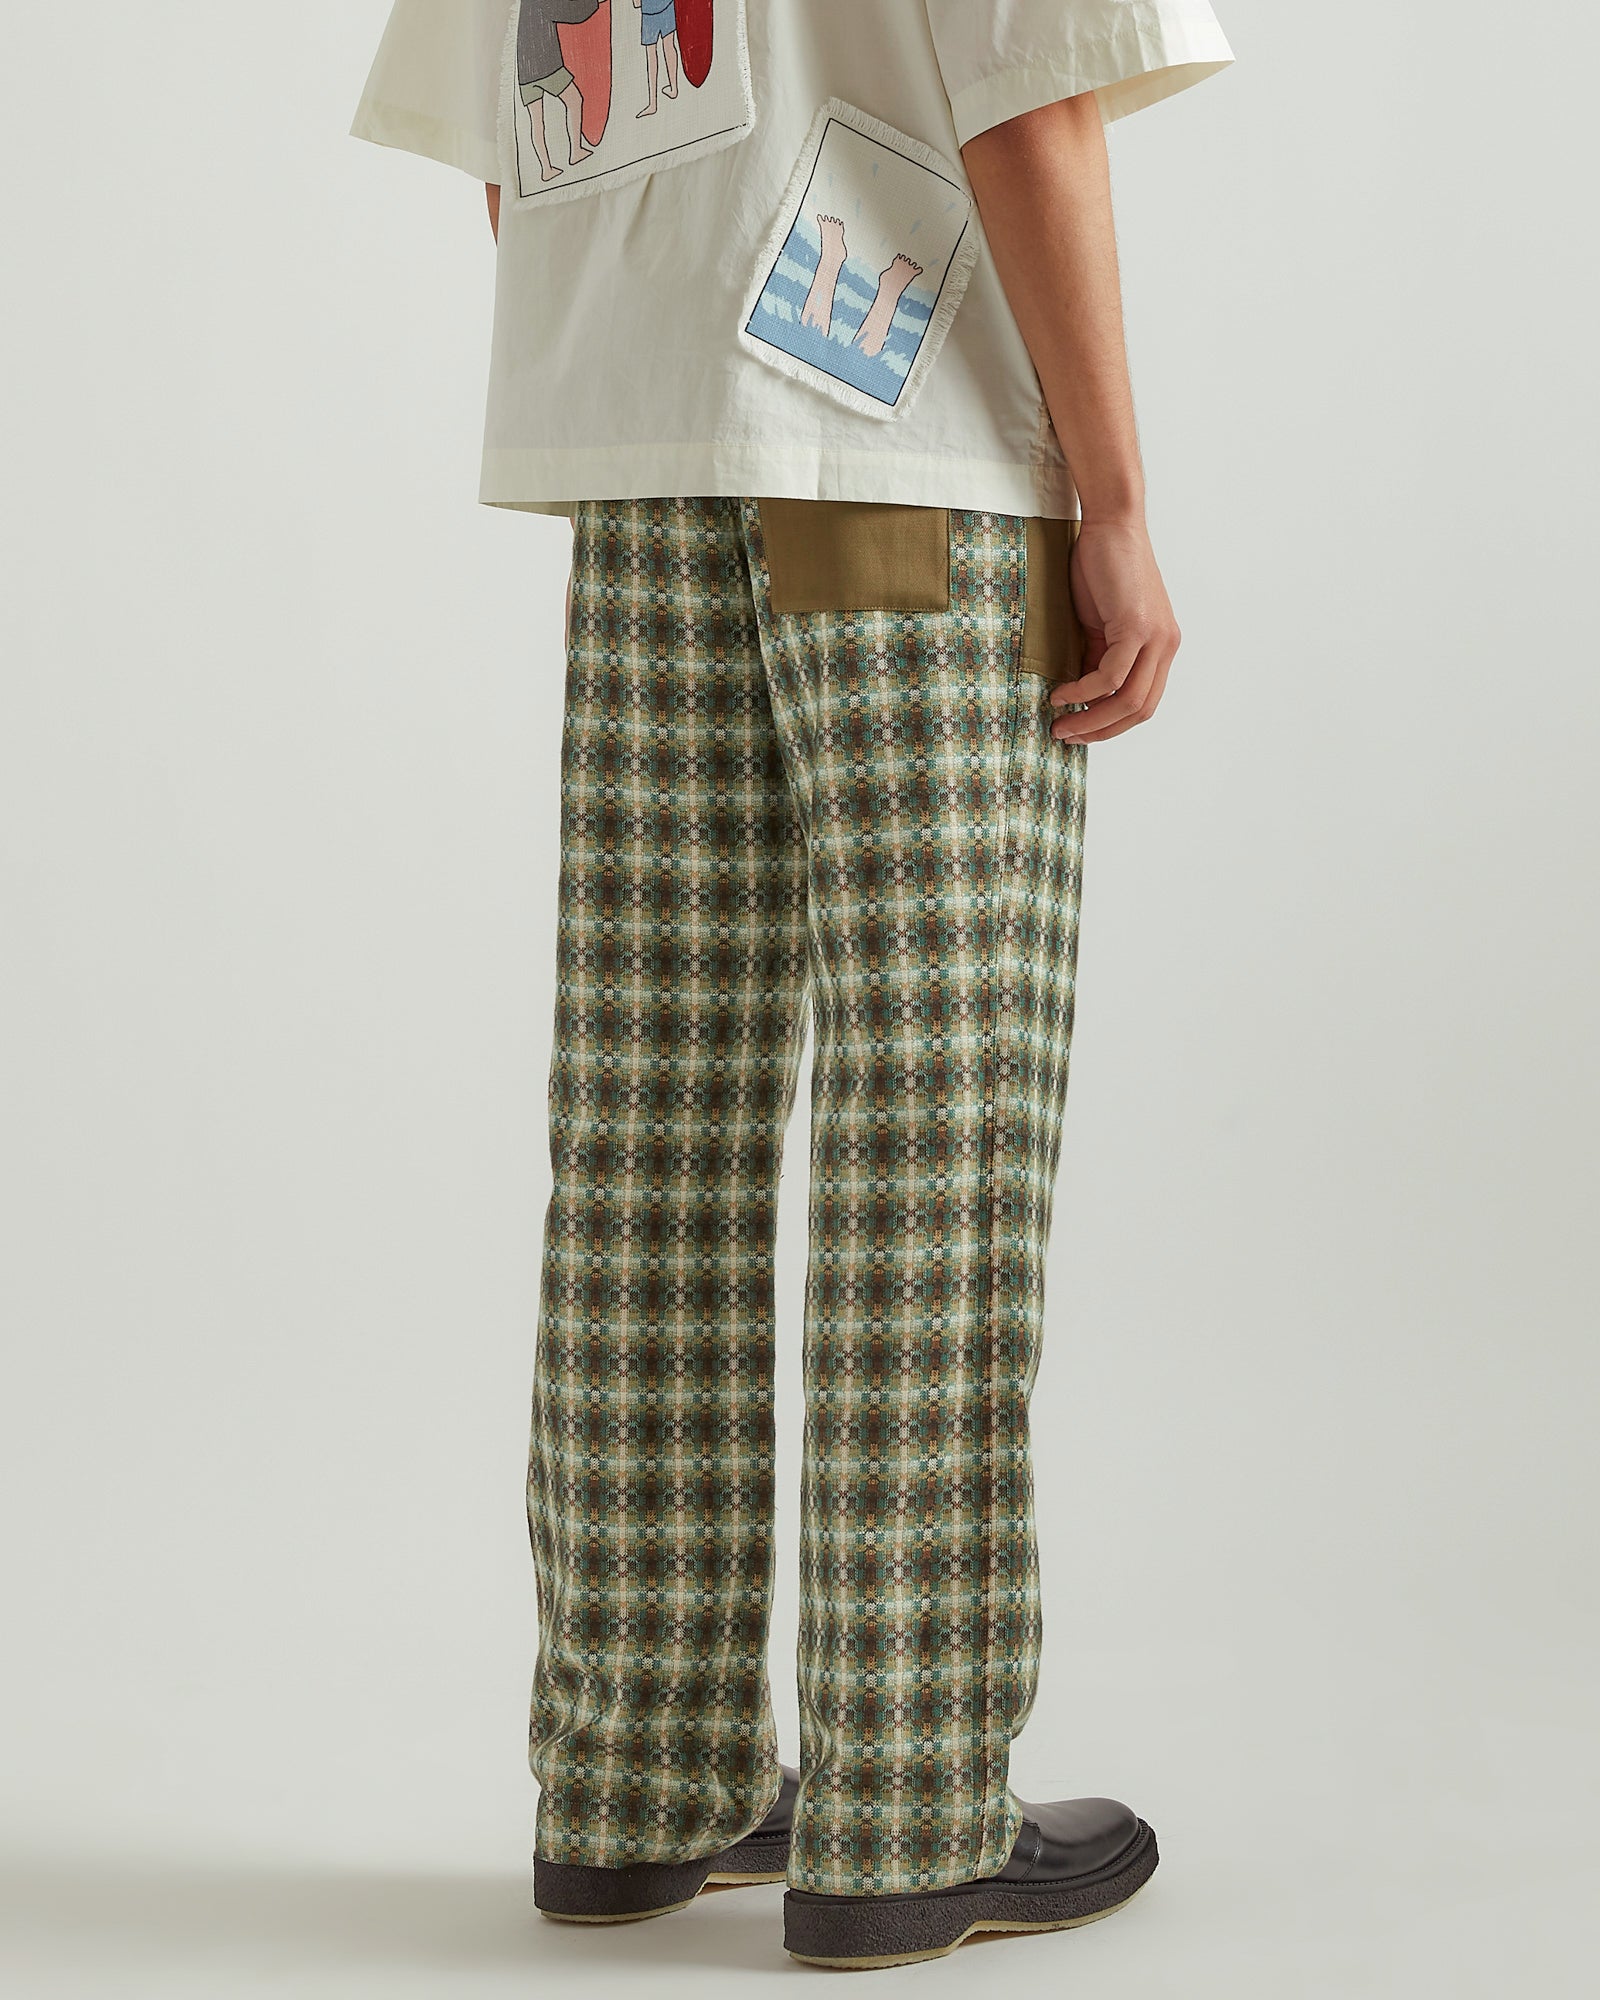 Patchwork Pants in Green Plaid